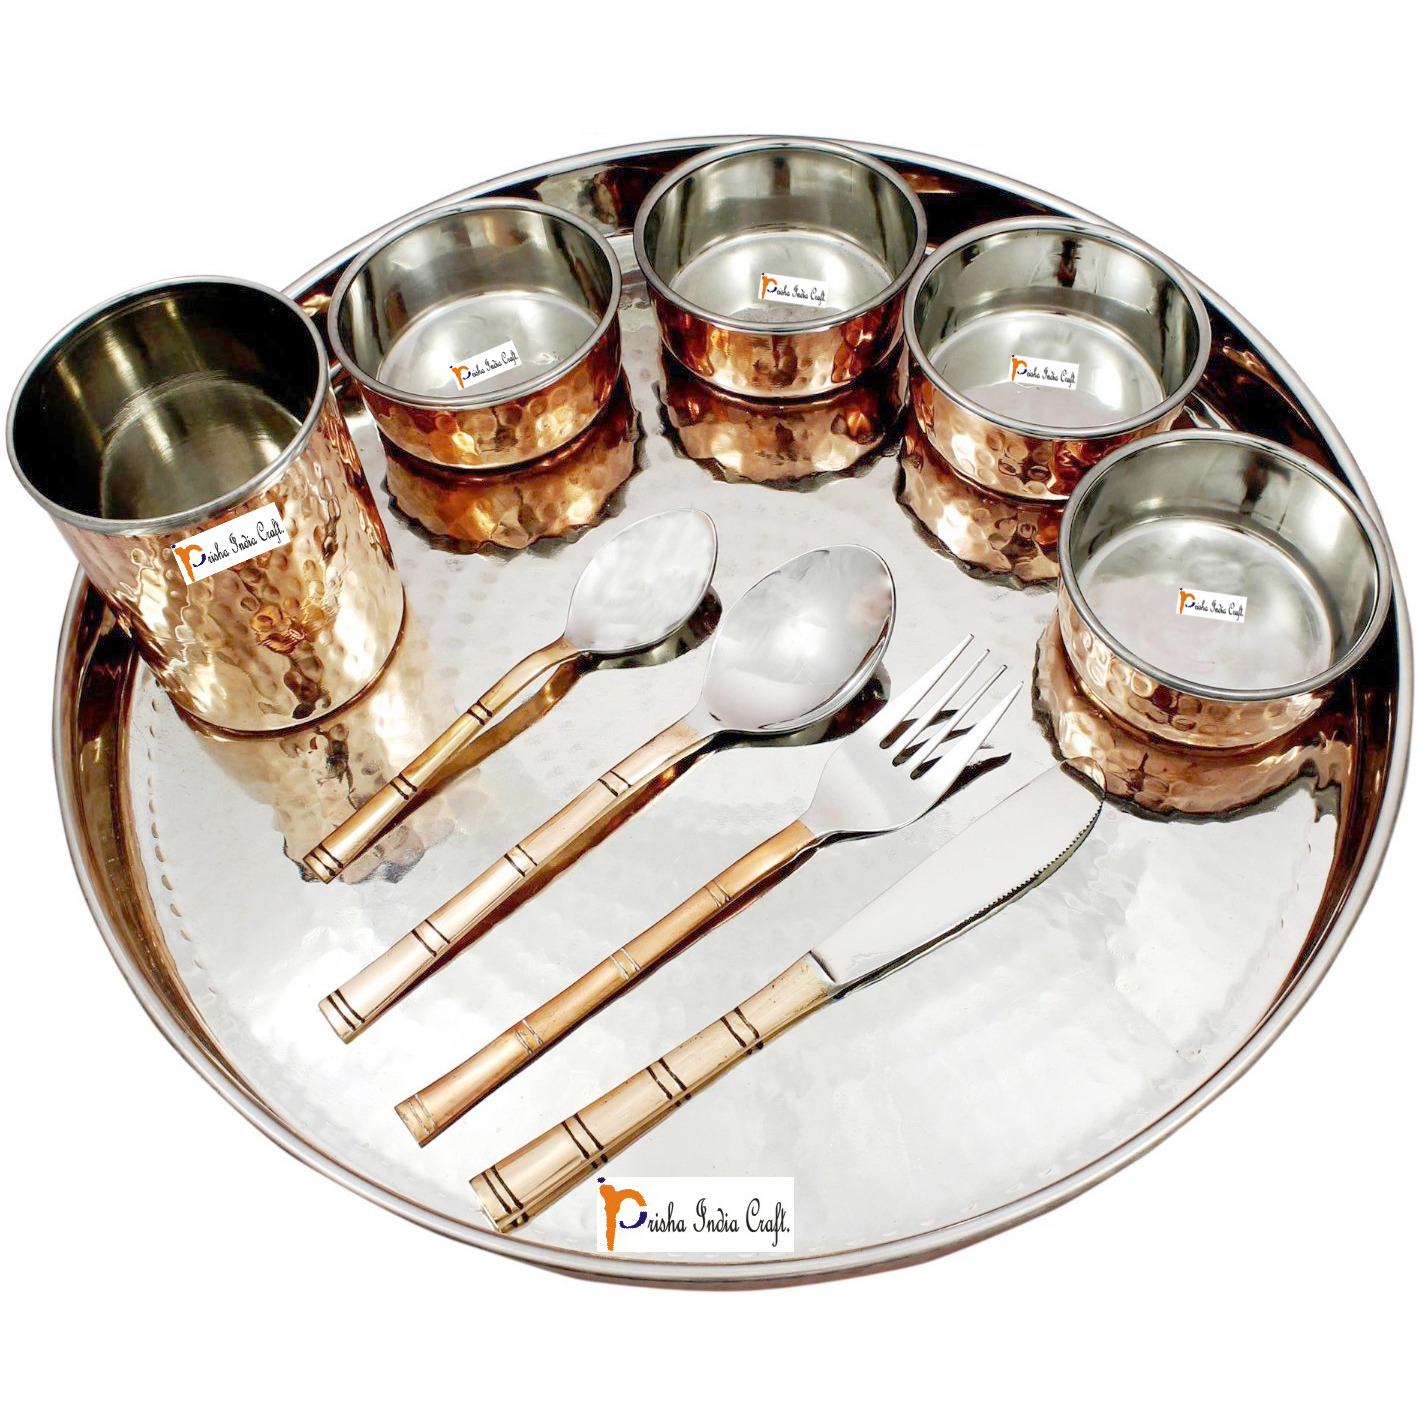 Prisha India Craft B. Set of 6 Dinnerware Traditional Stainless Steel Copper Dinner Set of Thali Plate, Bowls, Glass and Spoons, Dia 13  With 1 Pure Copper Maharaja Pitcher Jug - Christmas Gift